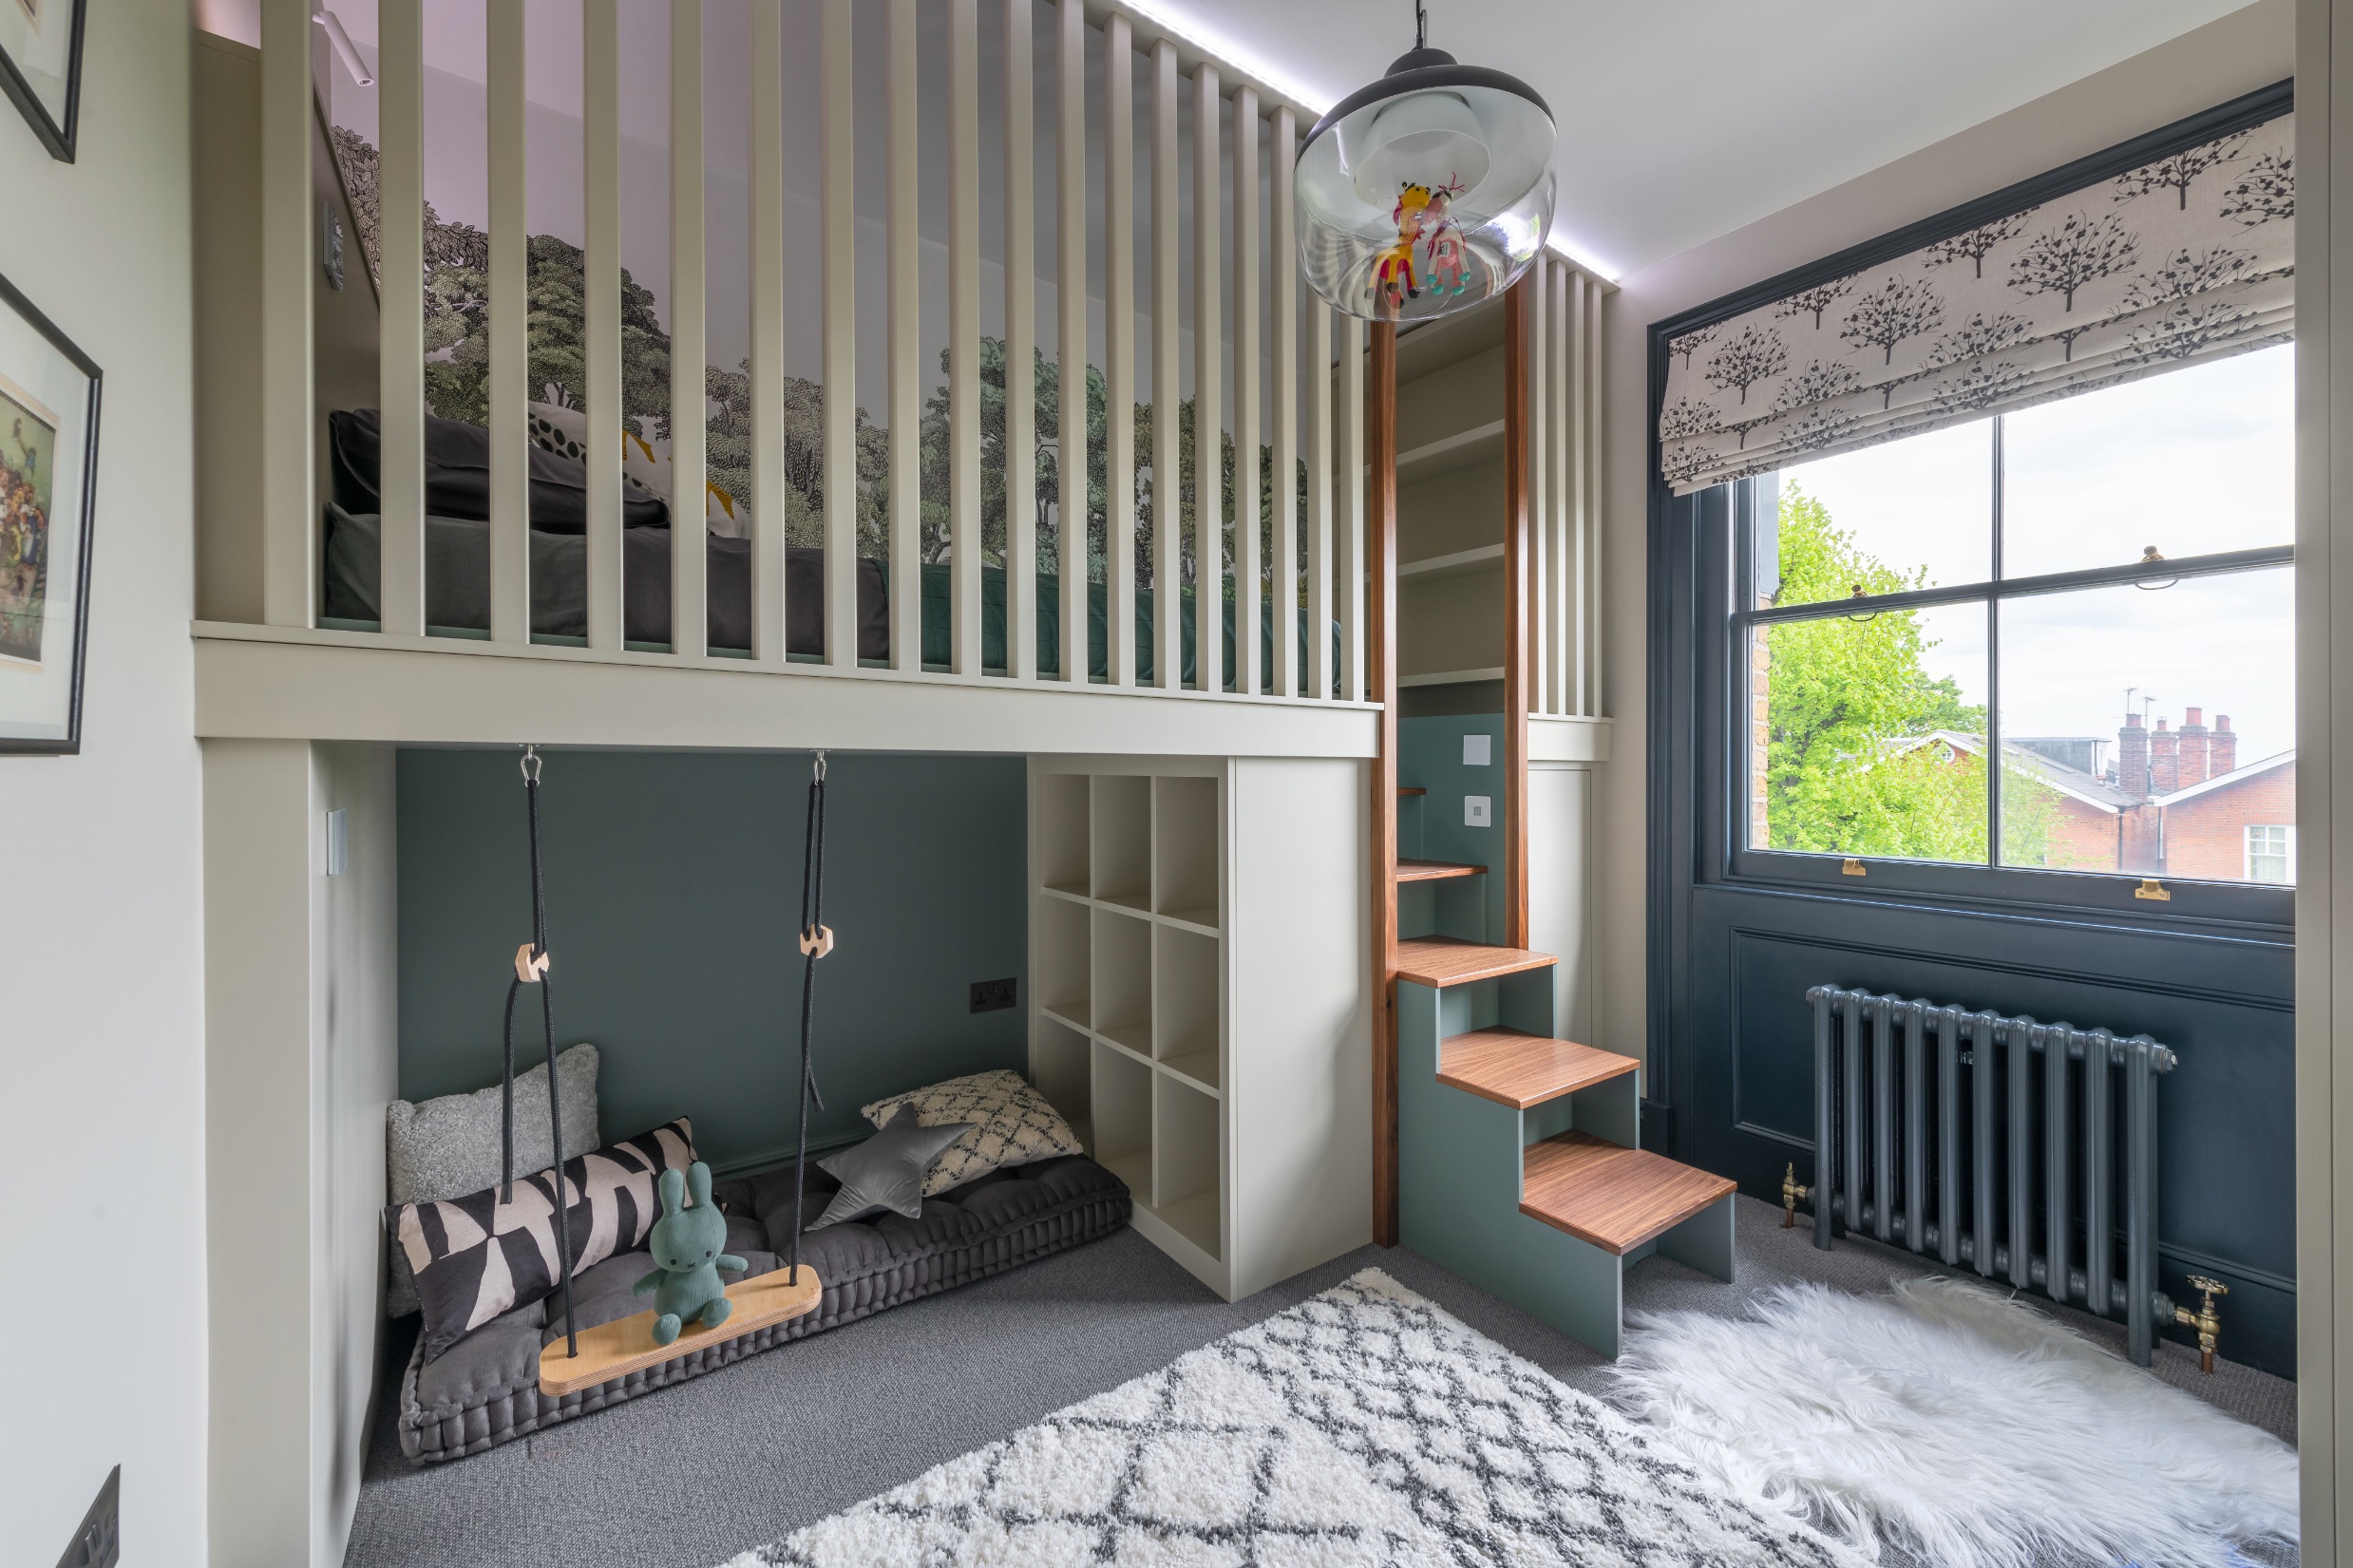 rich newman joinery luxury childs bedroom high sleeper and stairs